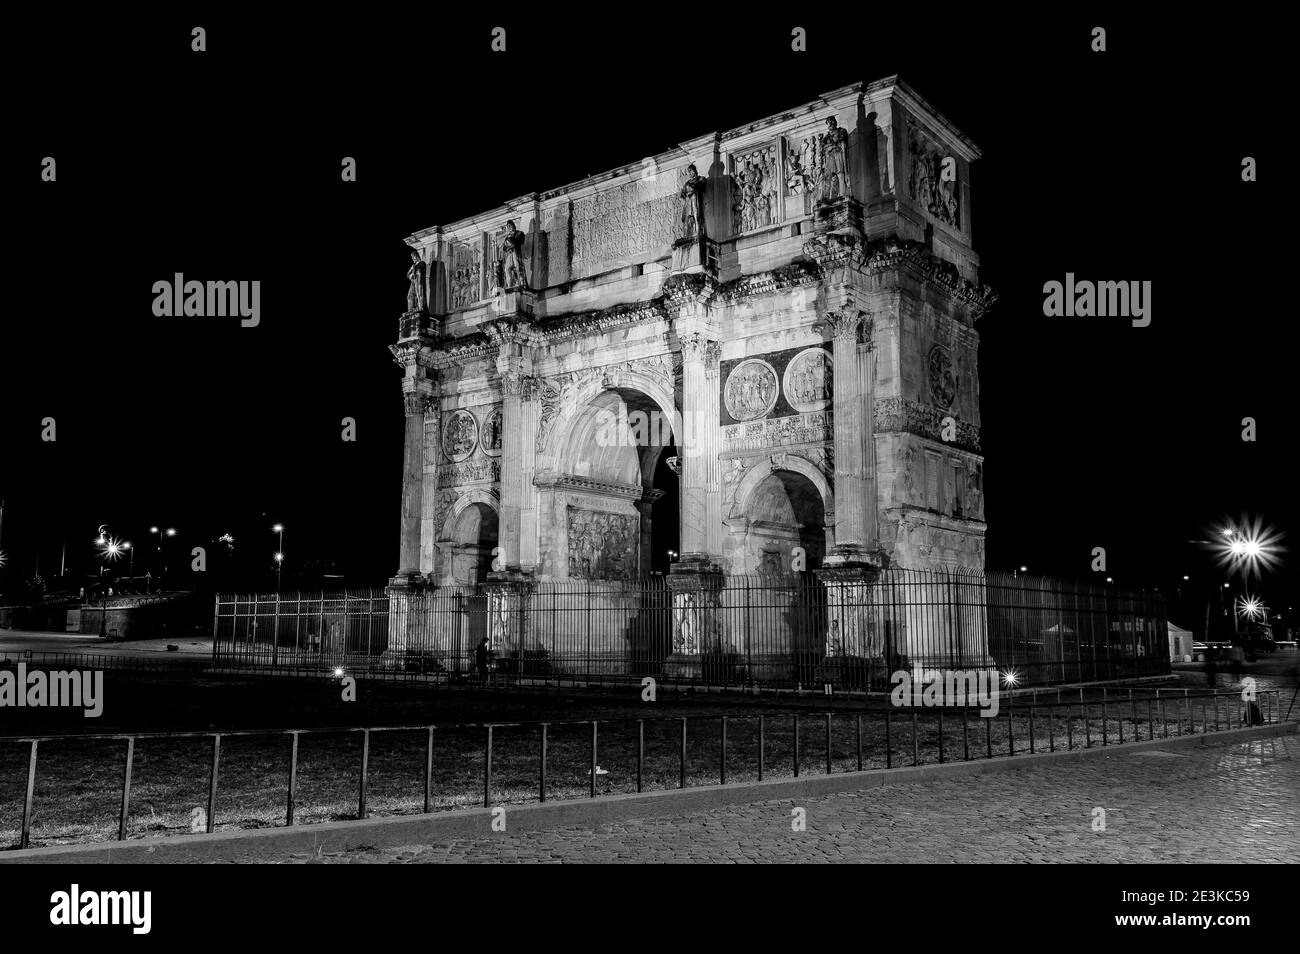 Tipycal Roman Architecture taken by Night close to the Colosseum in the center of Rome in Italy Stock Photo